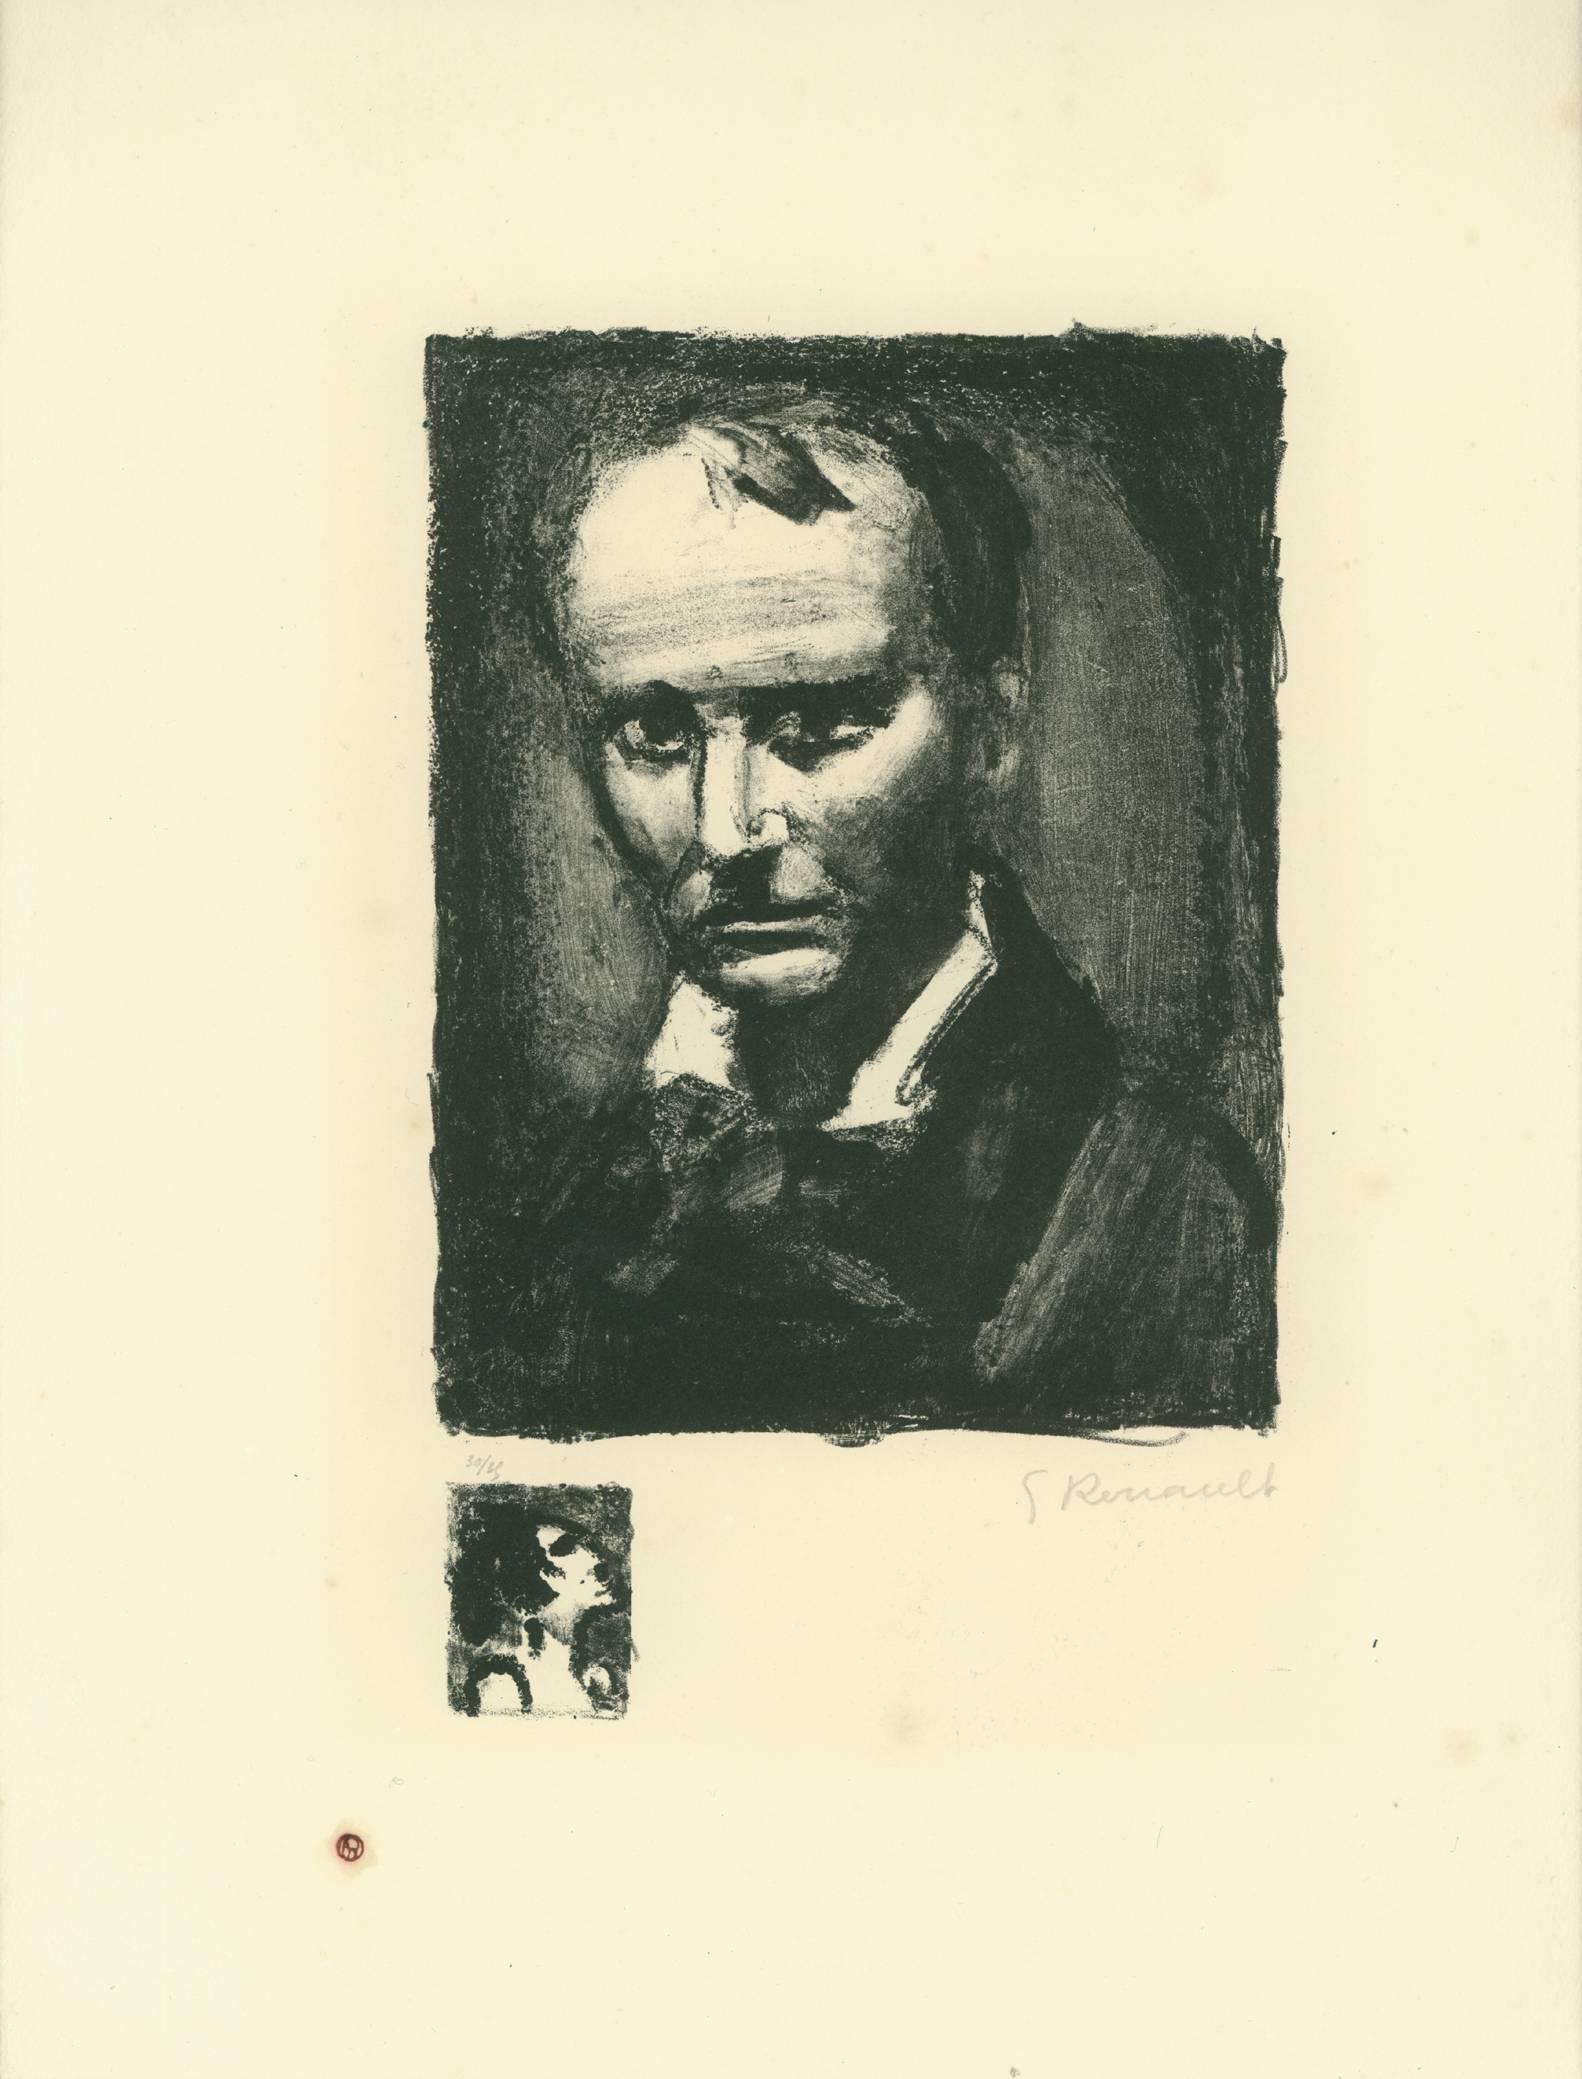 Portrait of Charles Baudelaire. - Print by Georges Rouault